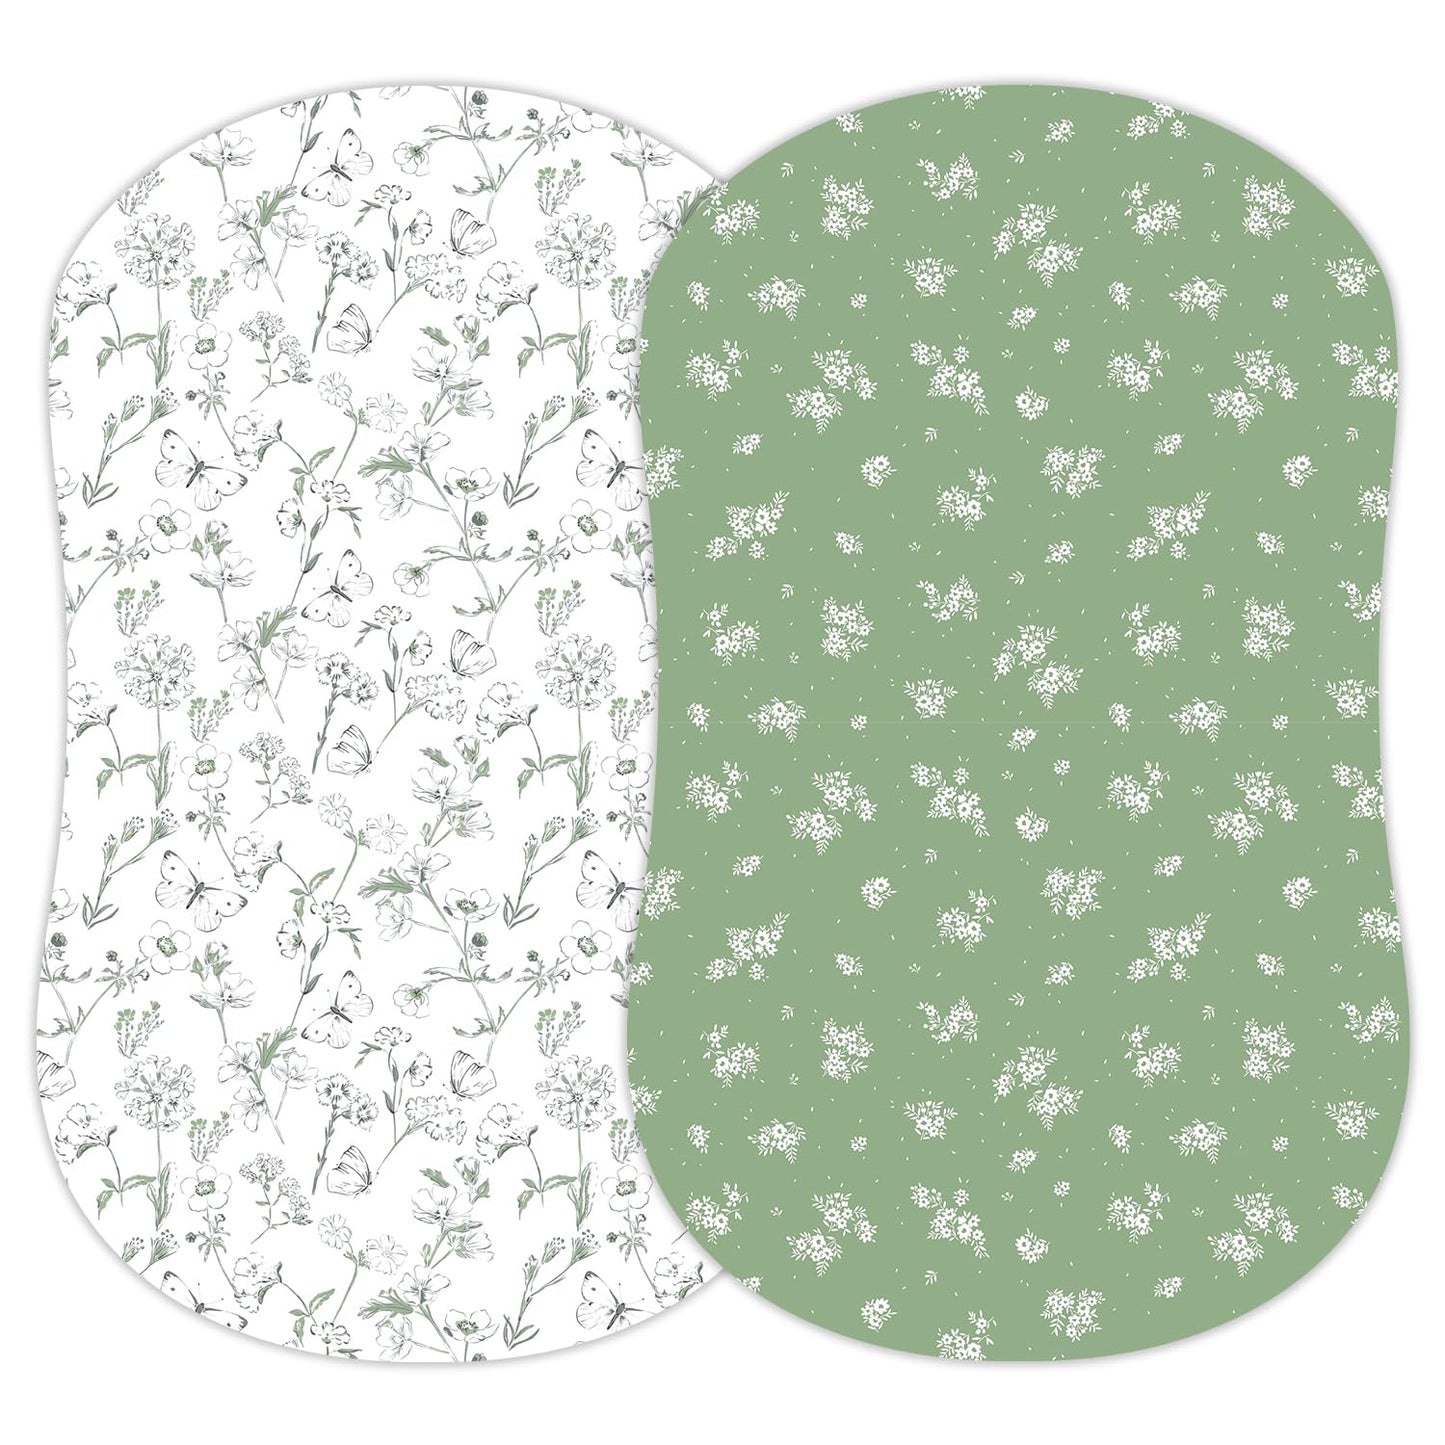 Sorrel + Fern Changing Pad Cover 2-Pack (Watercolor Airplanes and Clouds) - Premium Fitted Sheets - Buttery Soft Cotton Blend